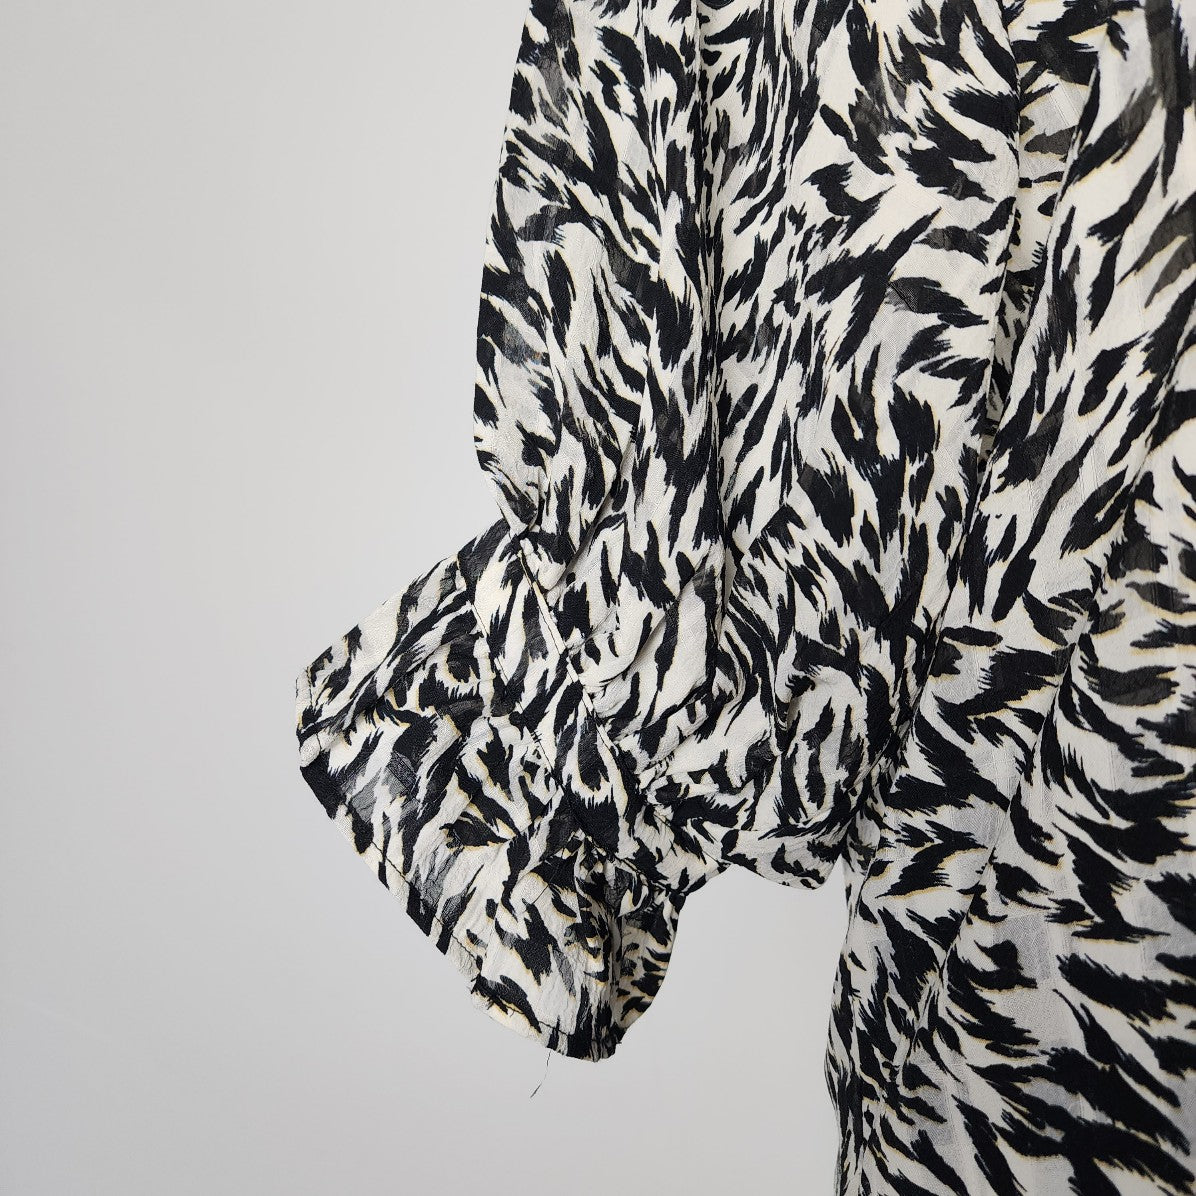 Soaked In Luxury Black Animal Print Blouse Size S